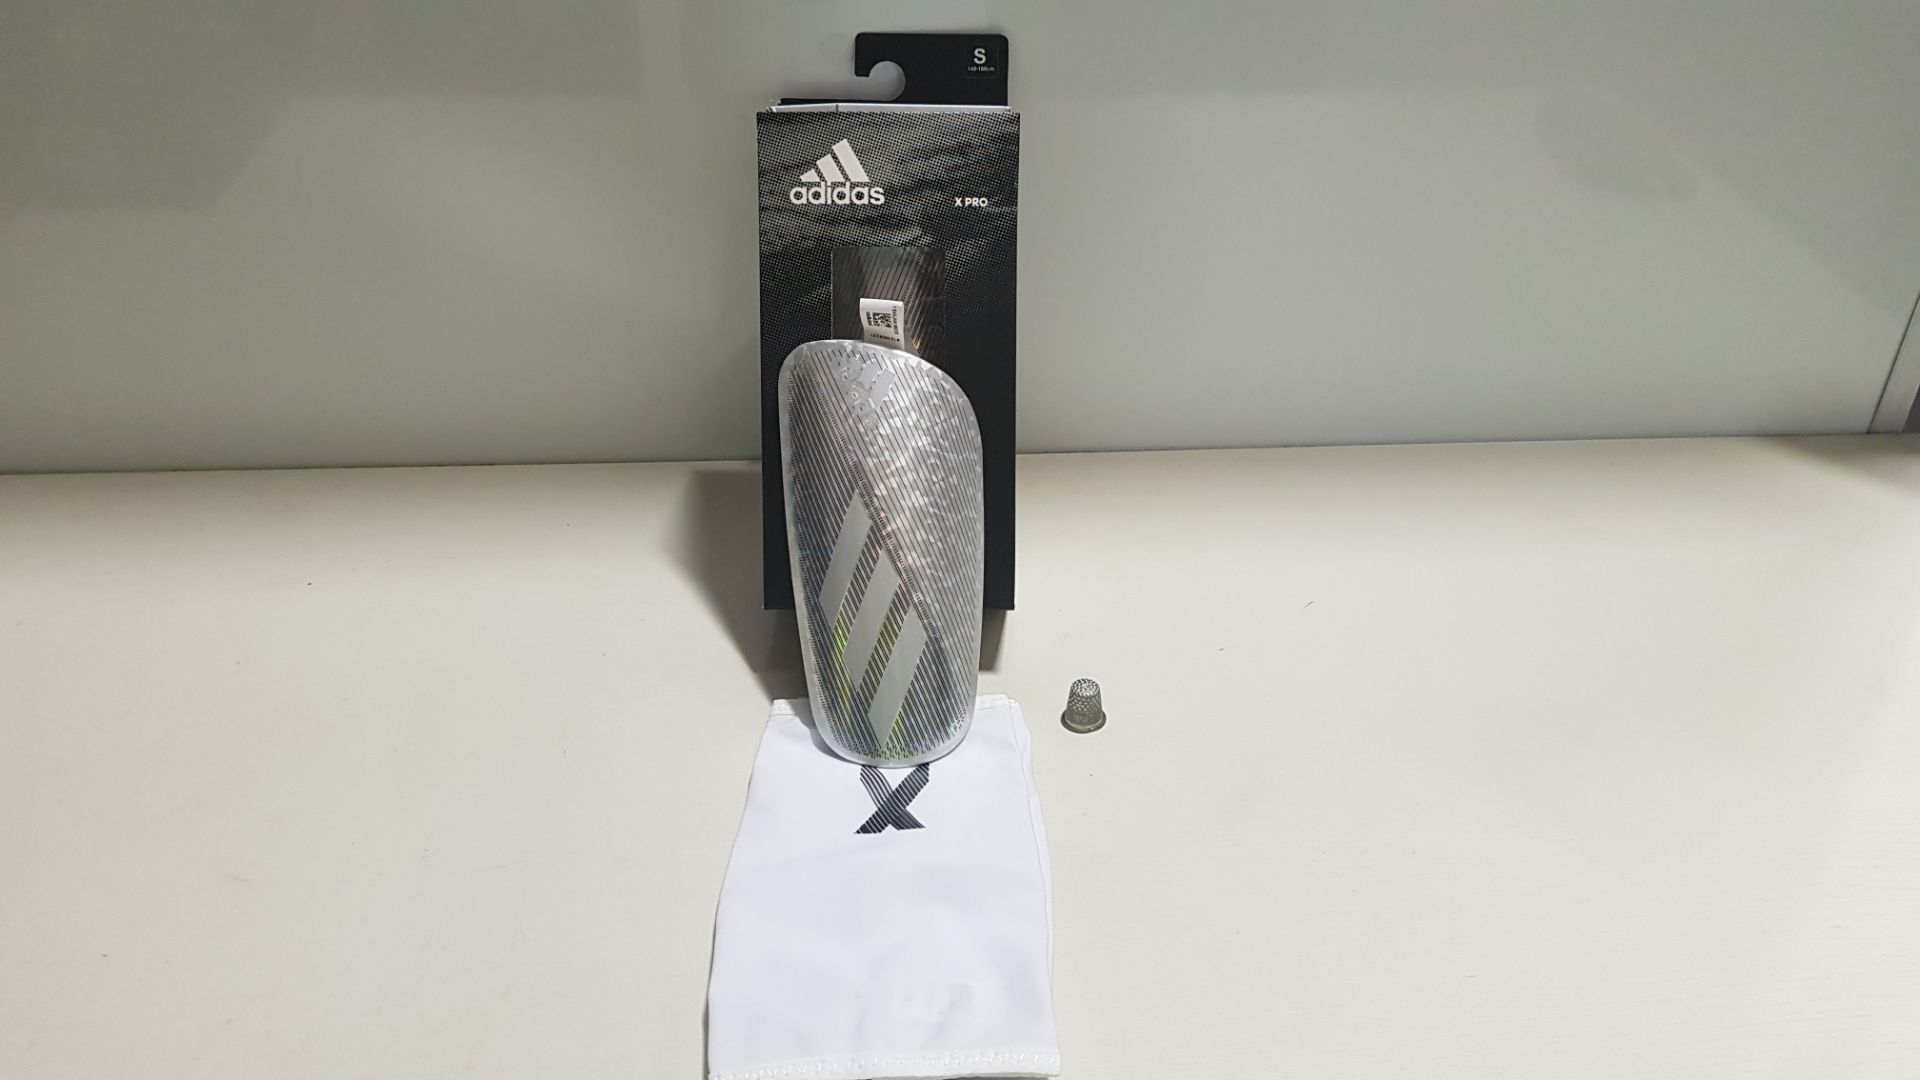 12 X BRAND NEW ADIDAS X PRO GREY SHINPADS WITH SLIP IN SHIELD AND SLEEVE SIZE SMALL